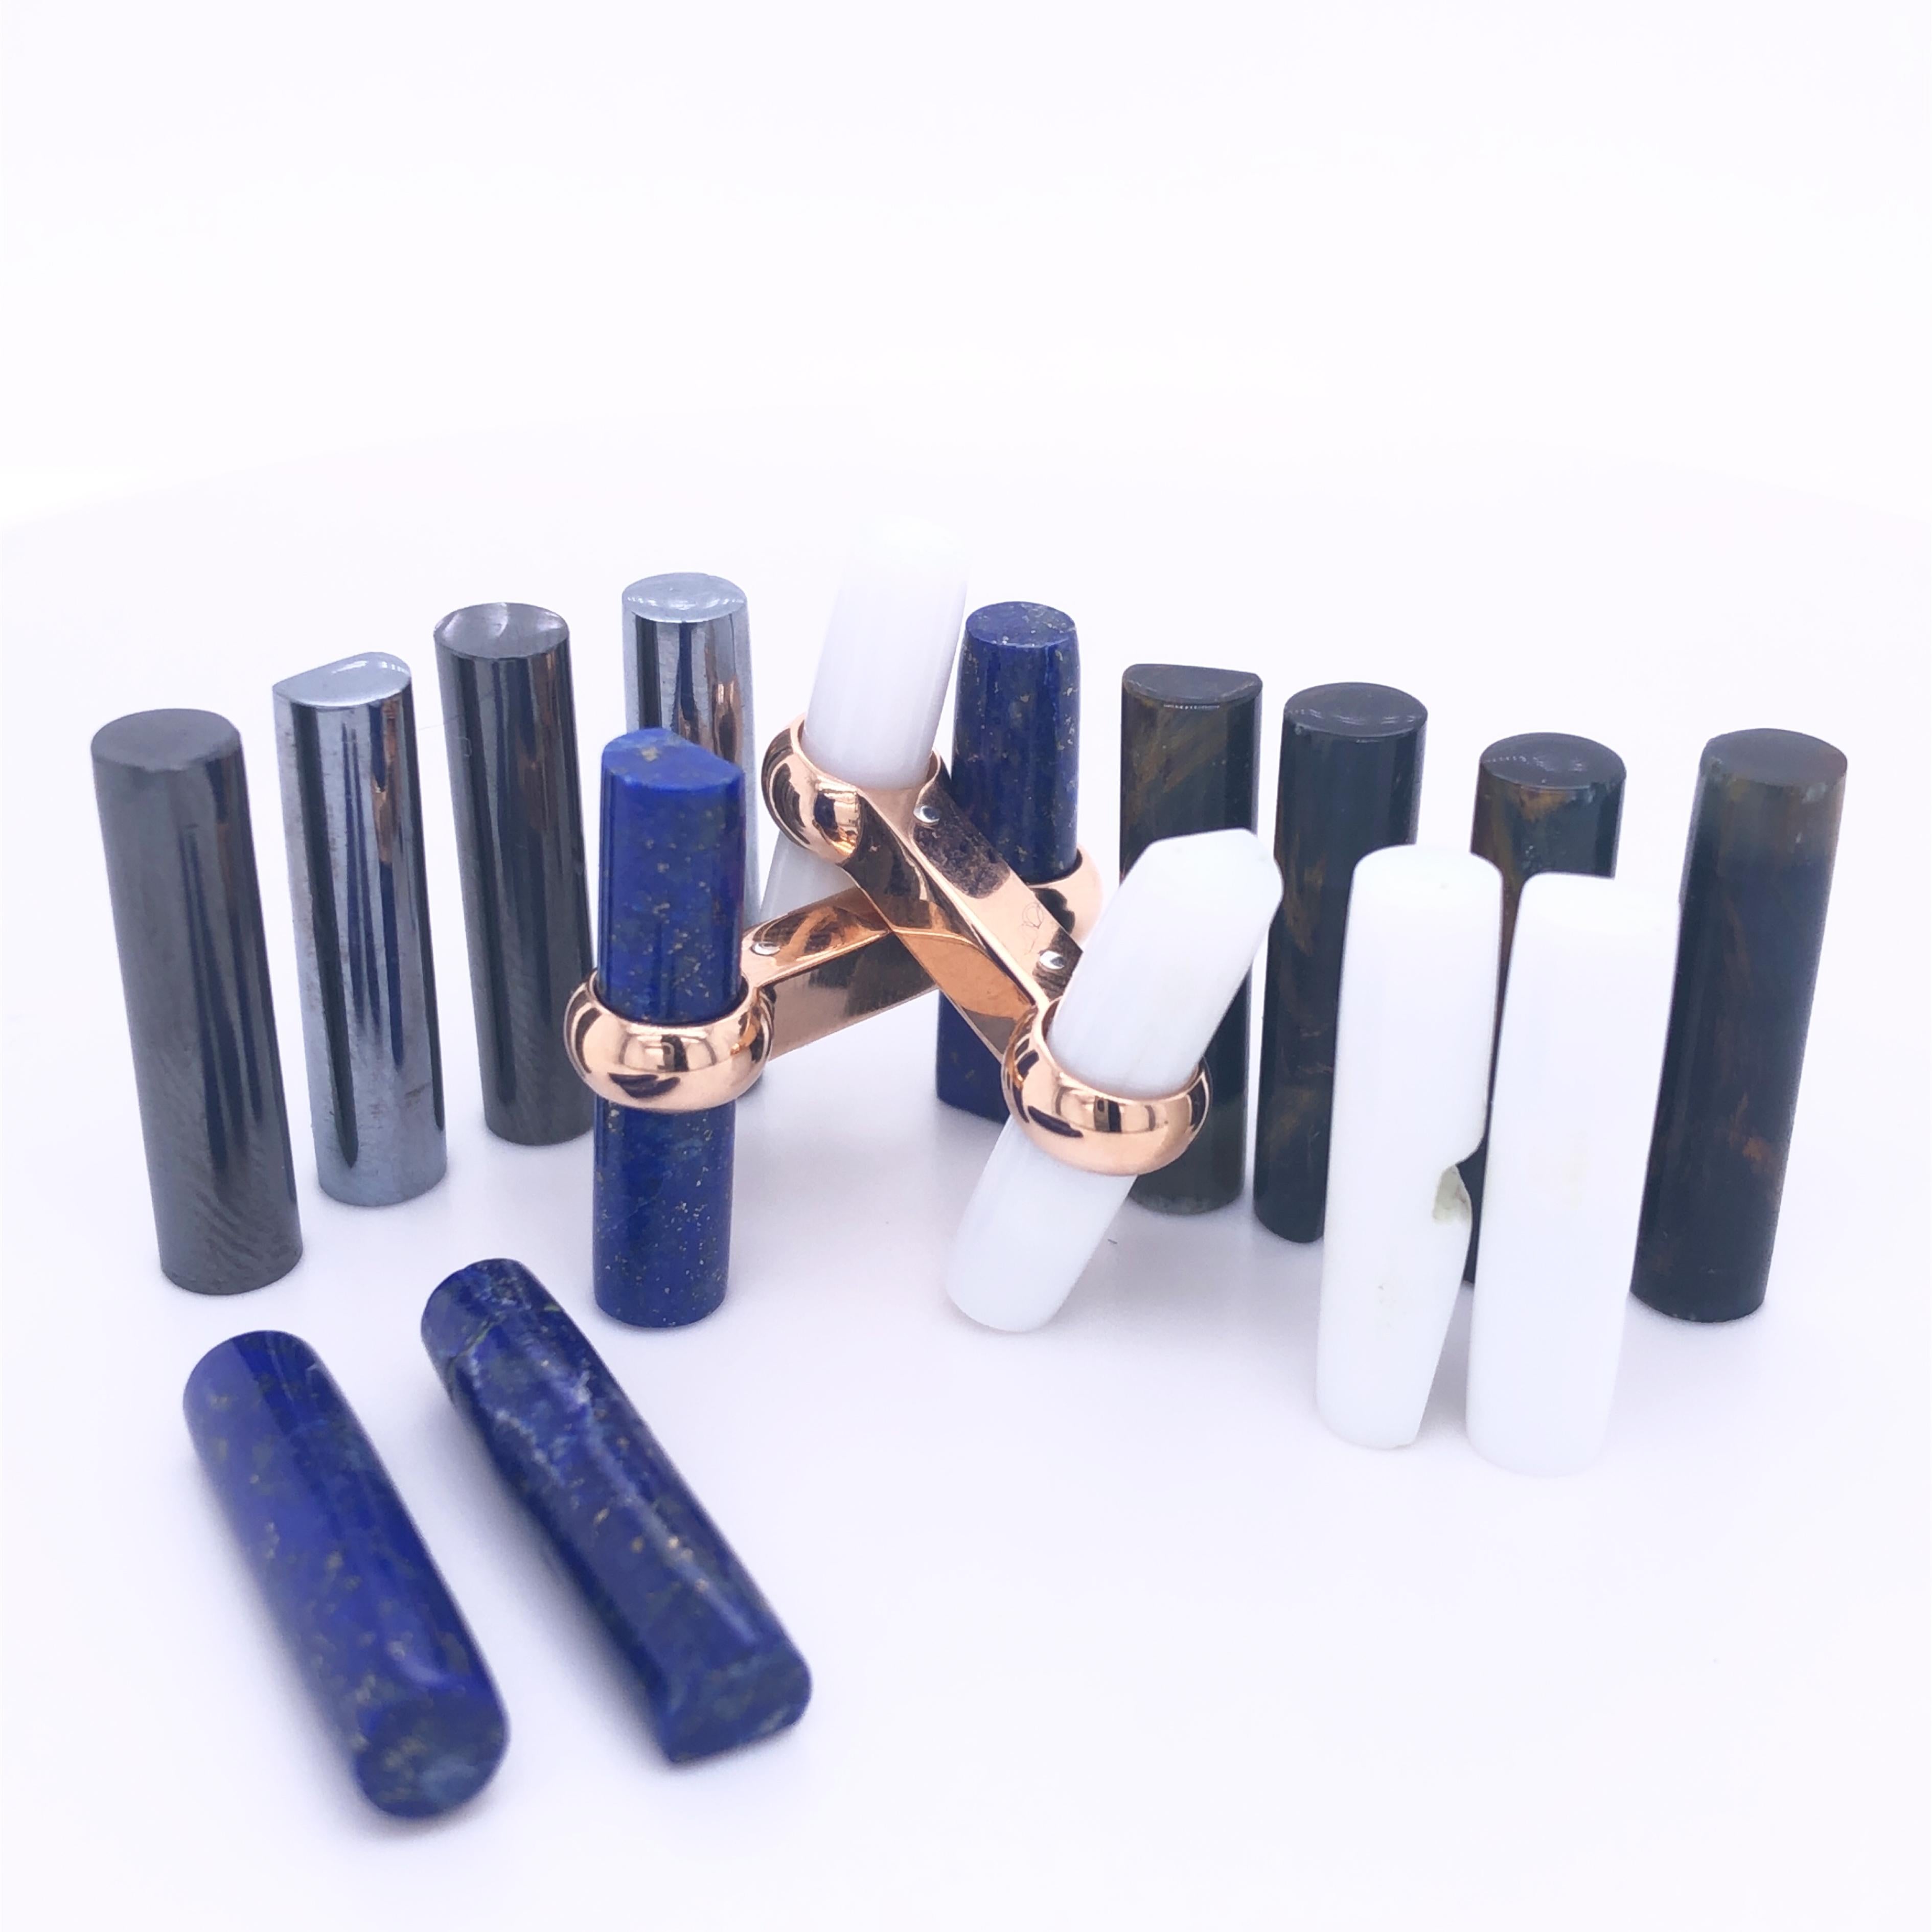 Interchangeable Natural Semiprecious Stones Set Cufflinks featuring Persian LapisLazuli, Labradorite, Hematite, White Agate Hand Inlaid Batons, 18K Rose Gold Setting; a fitted Burgundy Leather Case completes this outstanding piece.